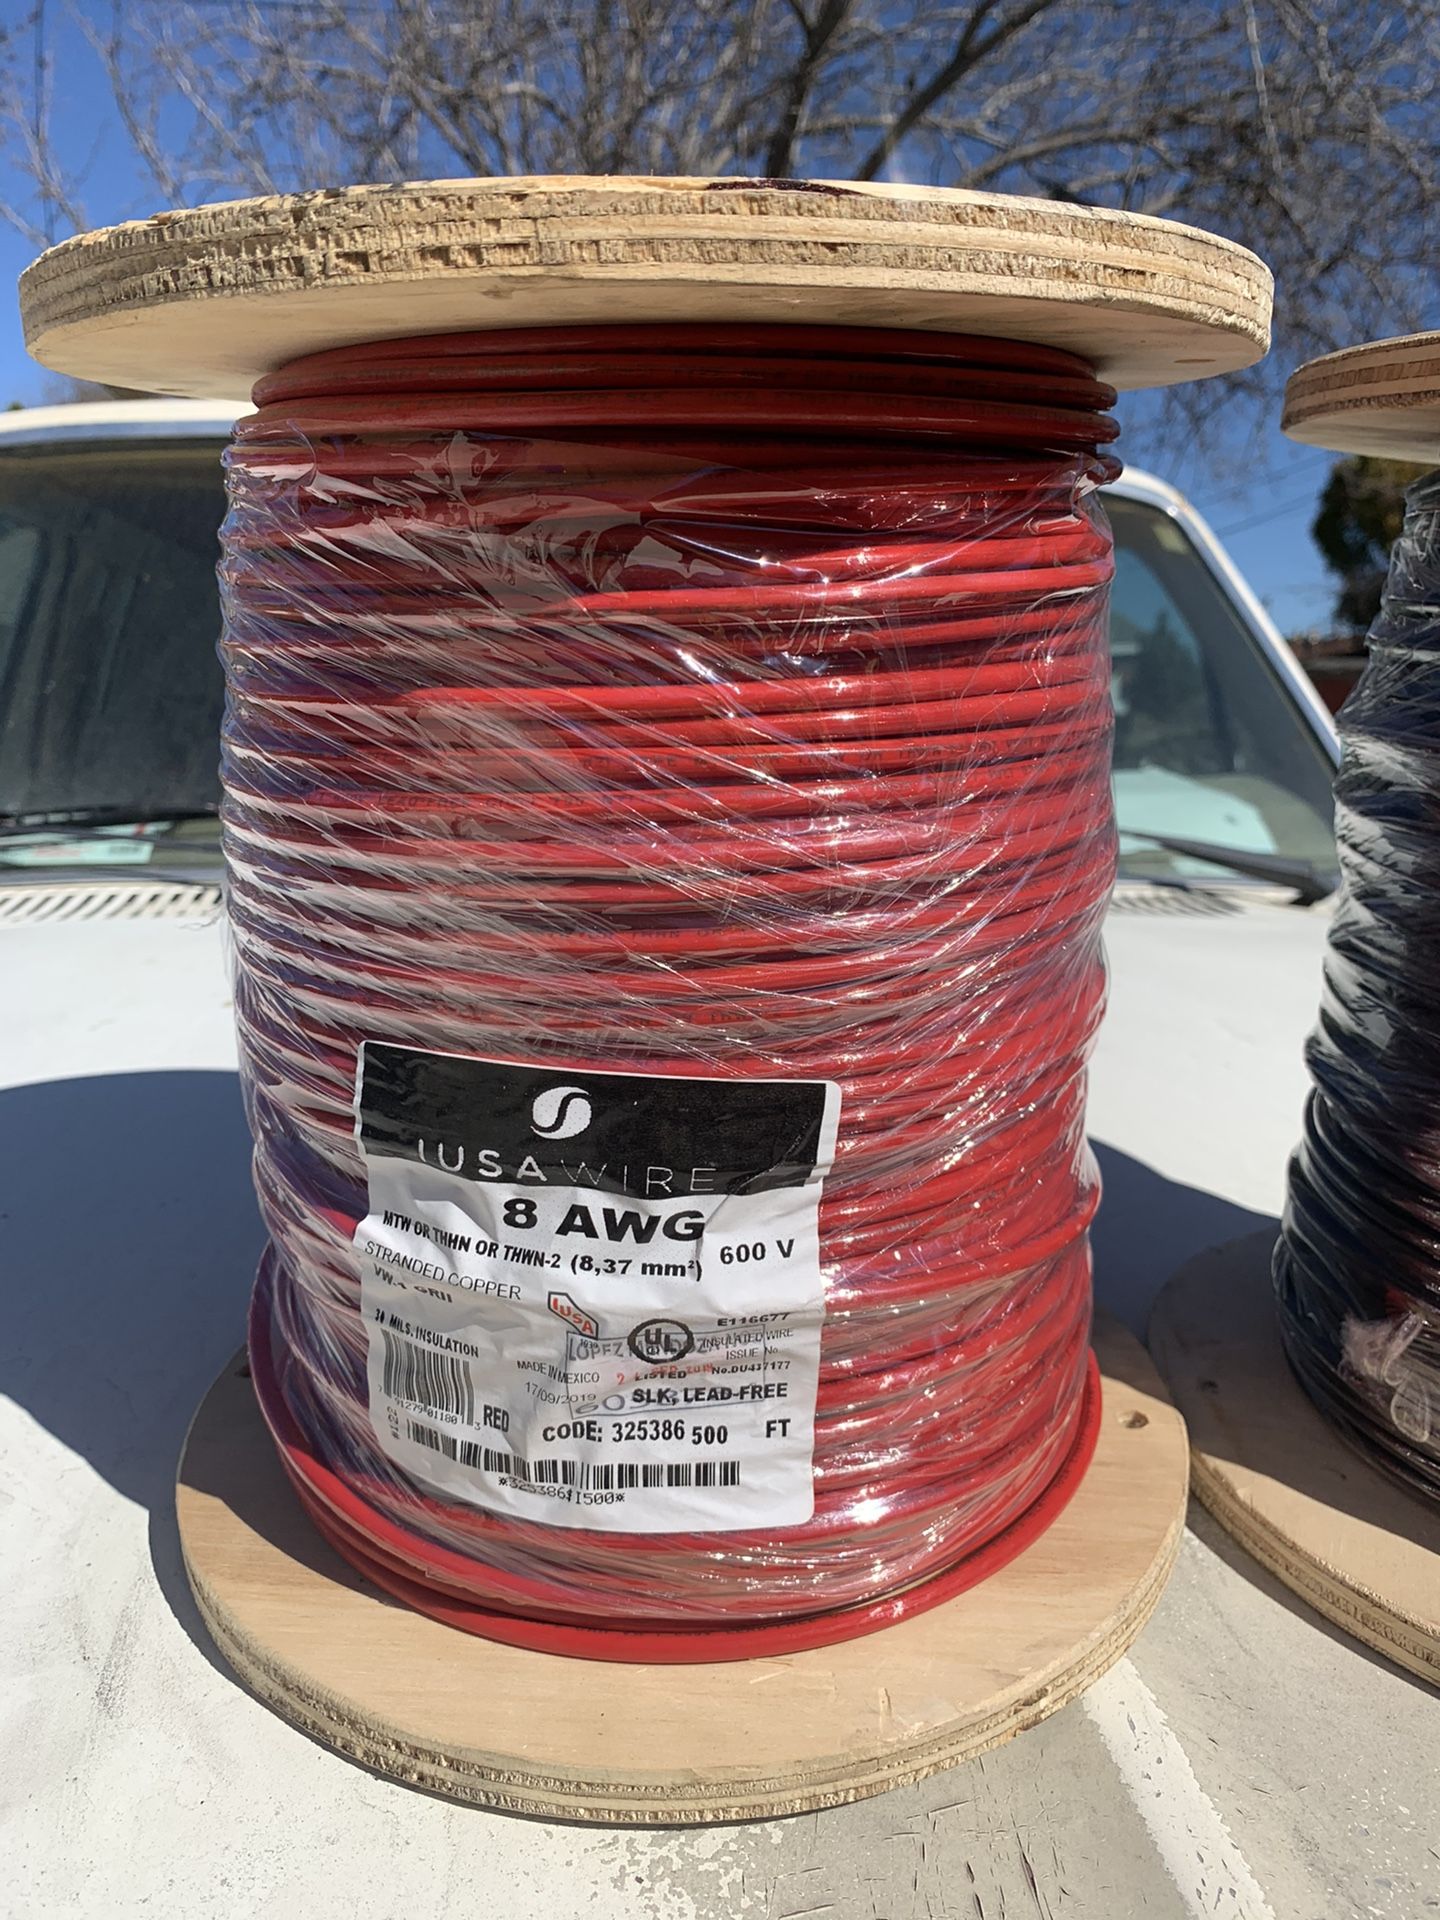 8 awg 600v wire 500ft